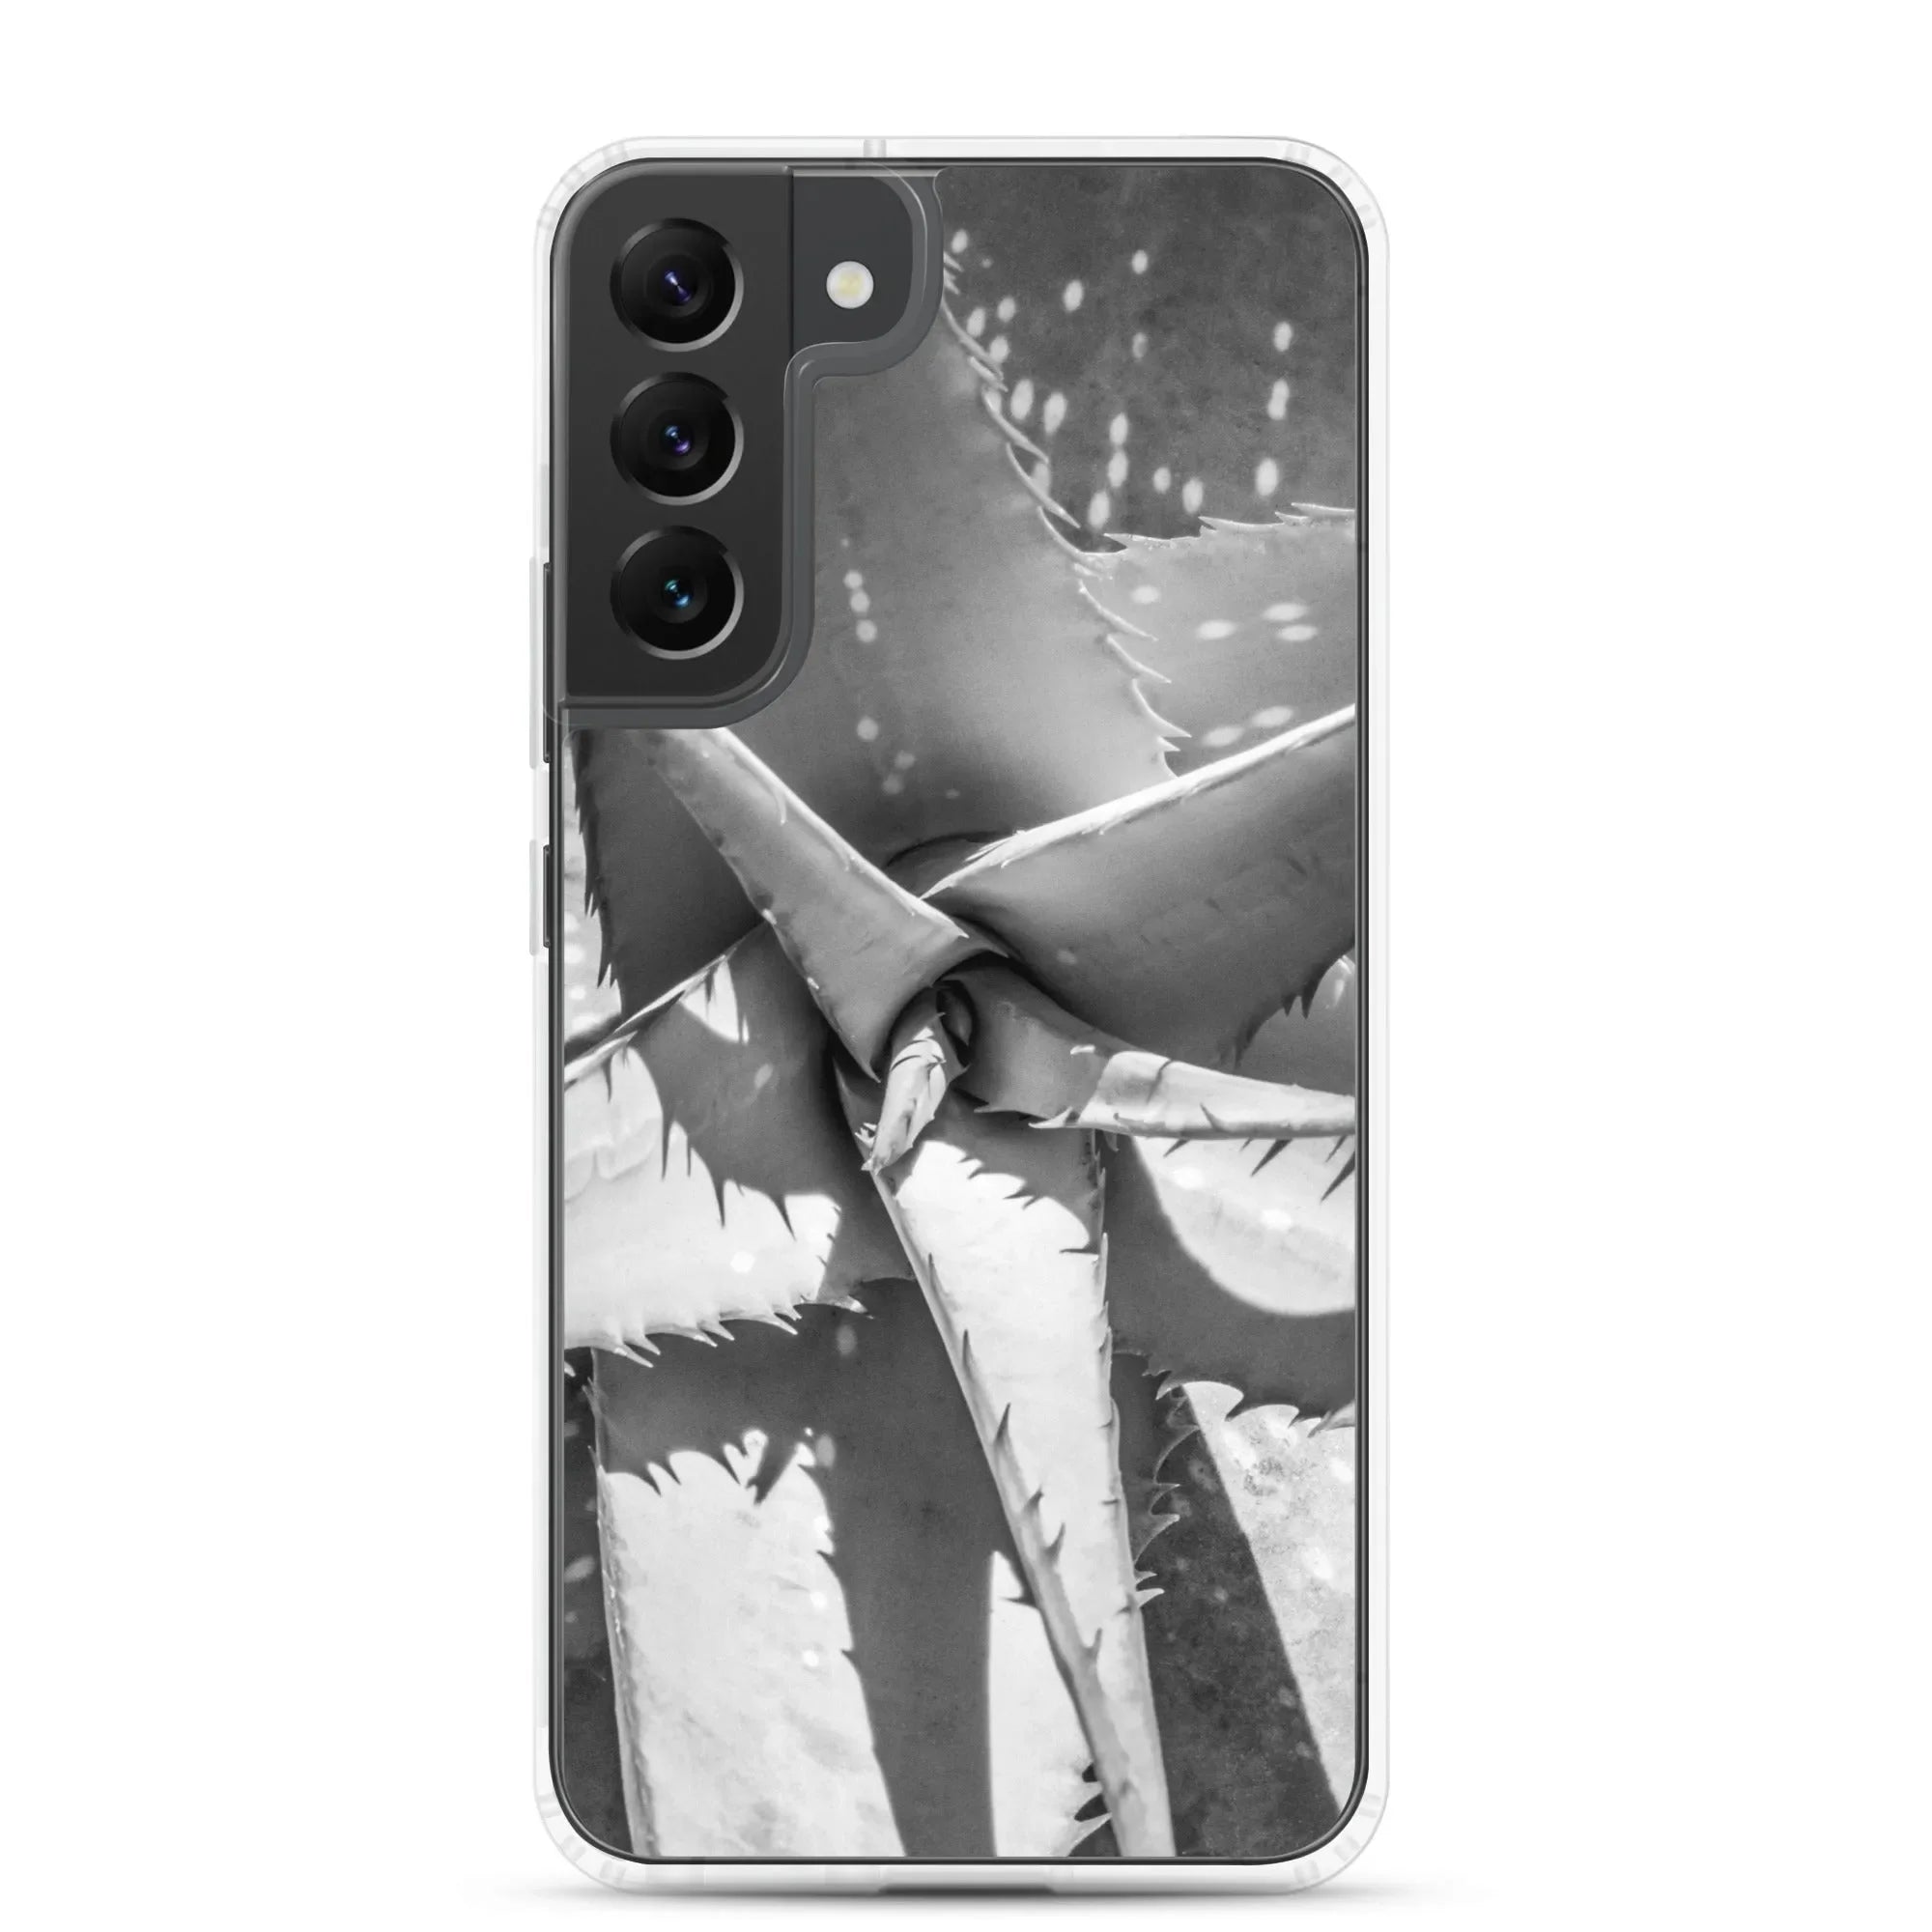 Starry - eyed Samsung Galaxy Case - Black And White - Samsung Galaxy S22 Plus - Mobile Phone Cases - Aesthetic Art